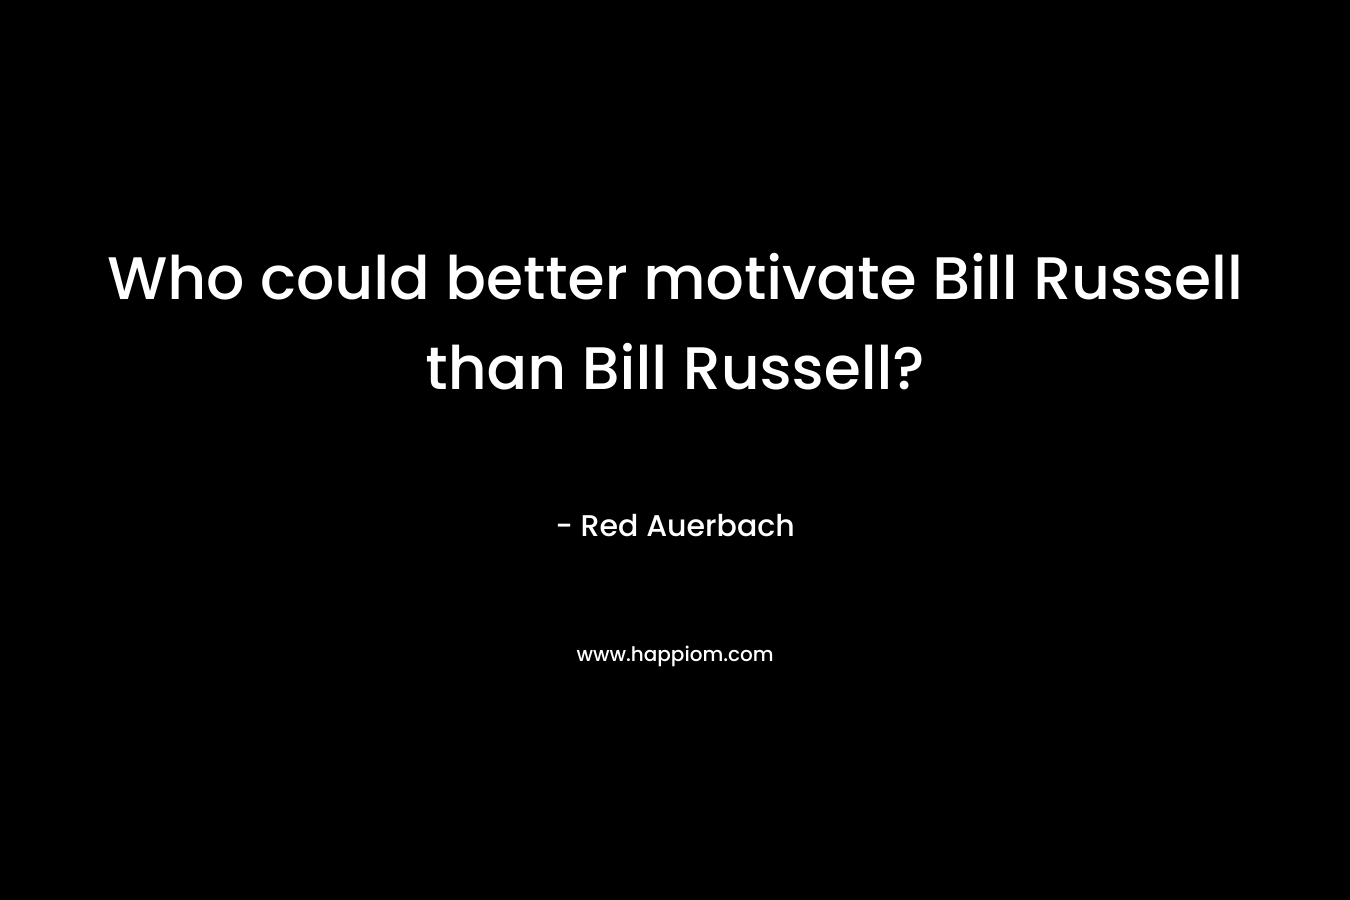 Who could better motivate Bill Russell than Bill Russell? – Red Auerbach